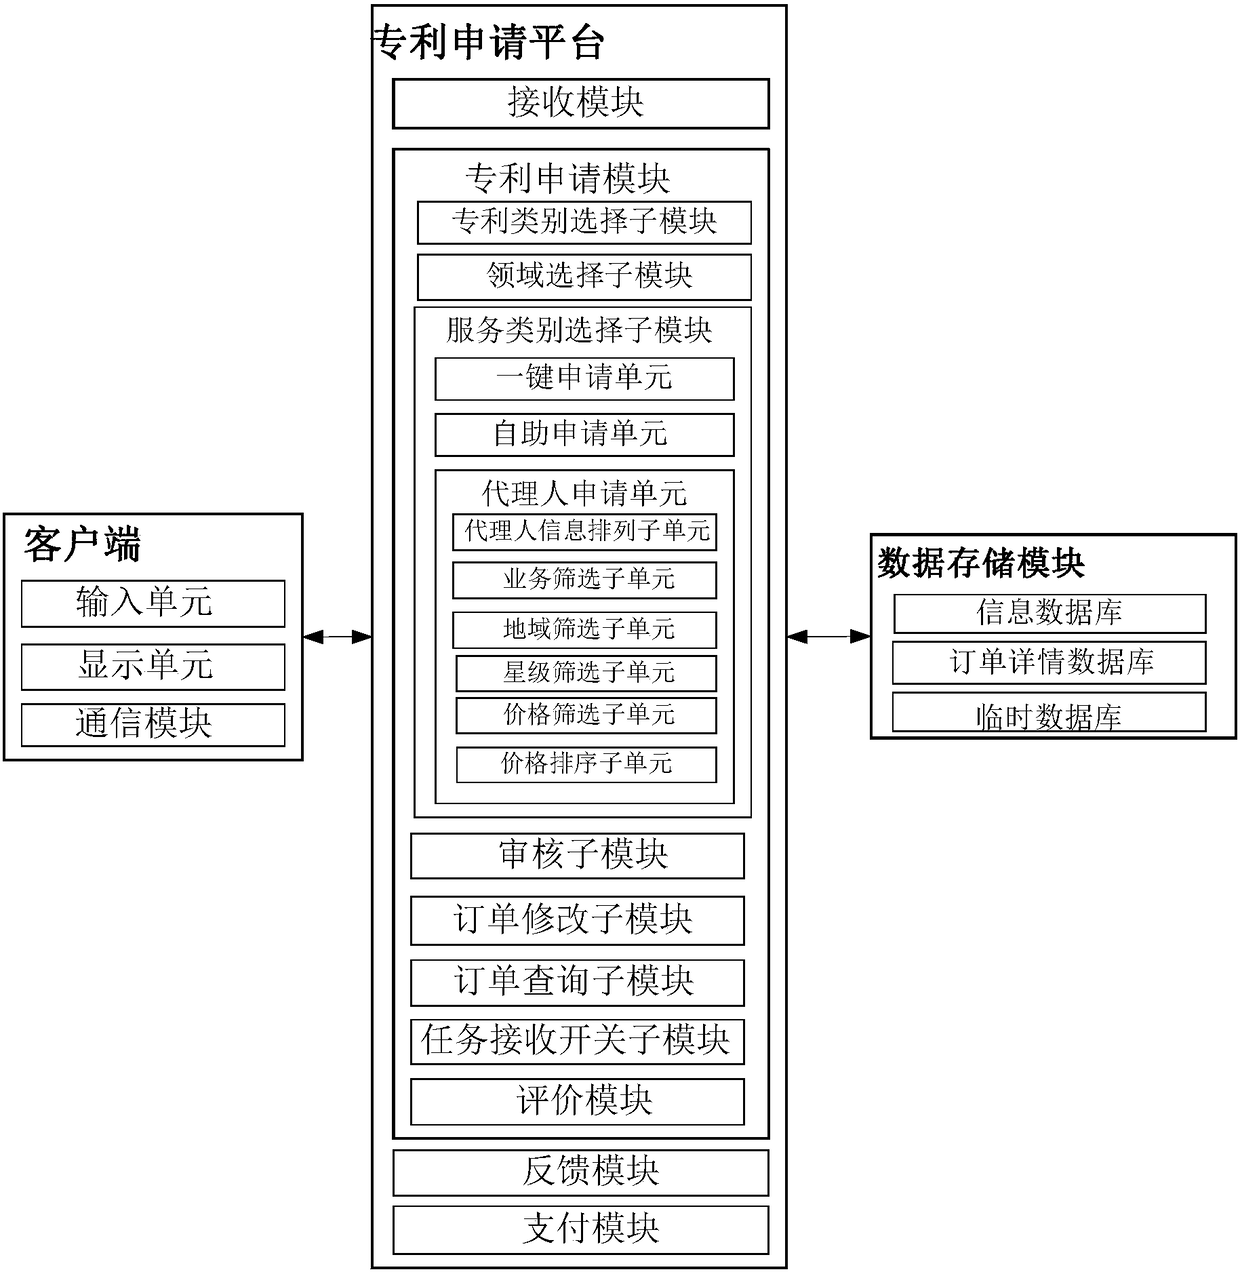 A patent application service system and method